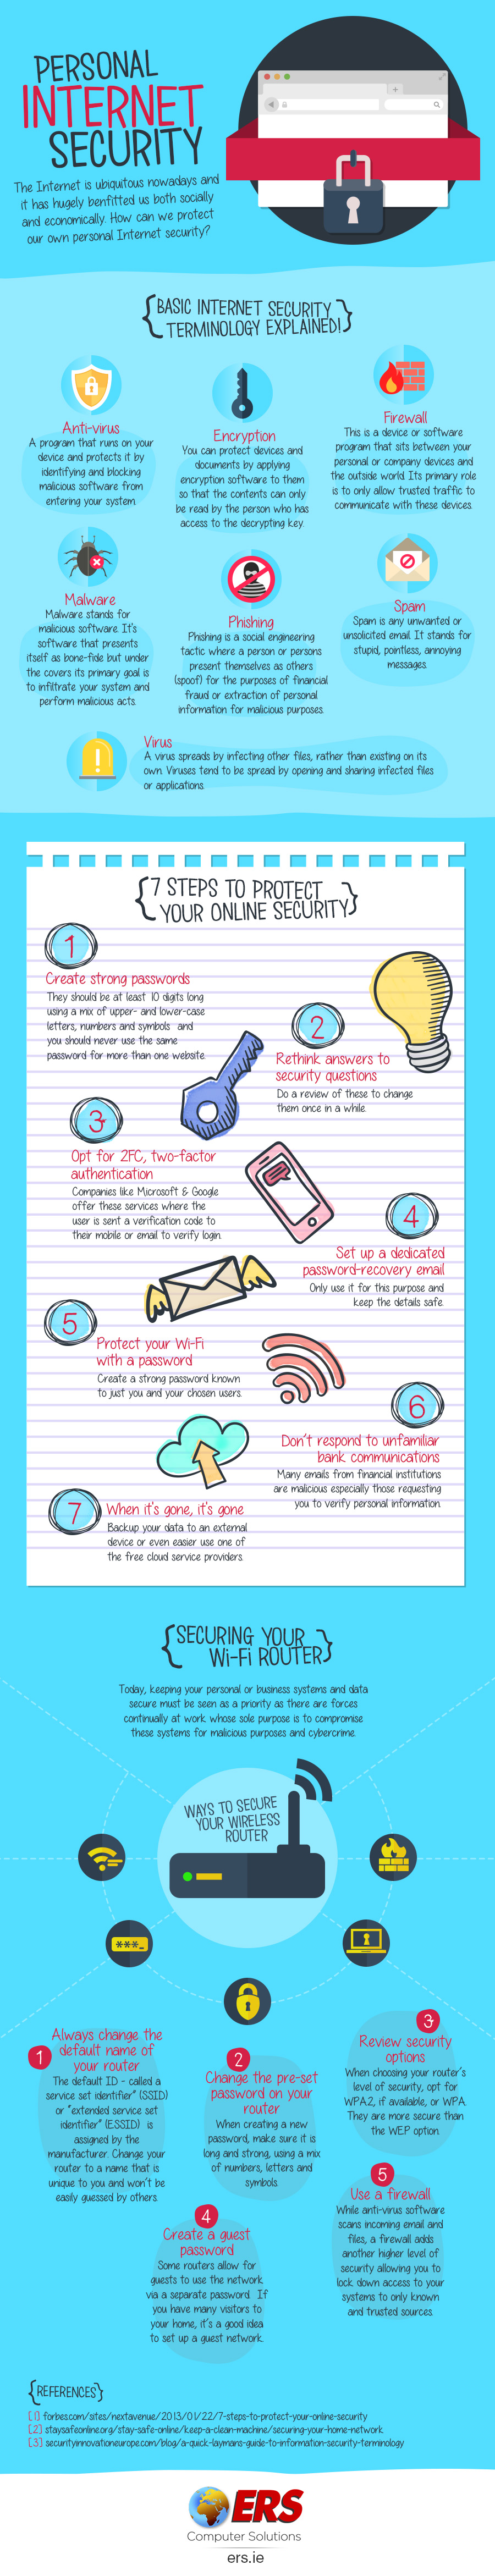 Personal Internet Security Infographic